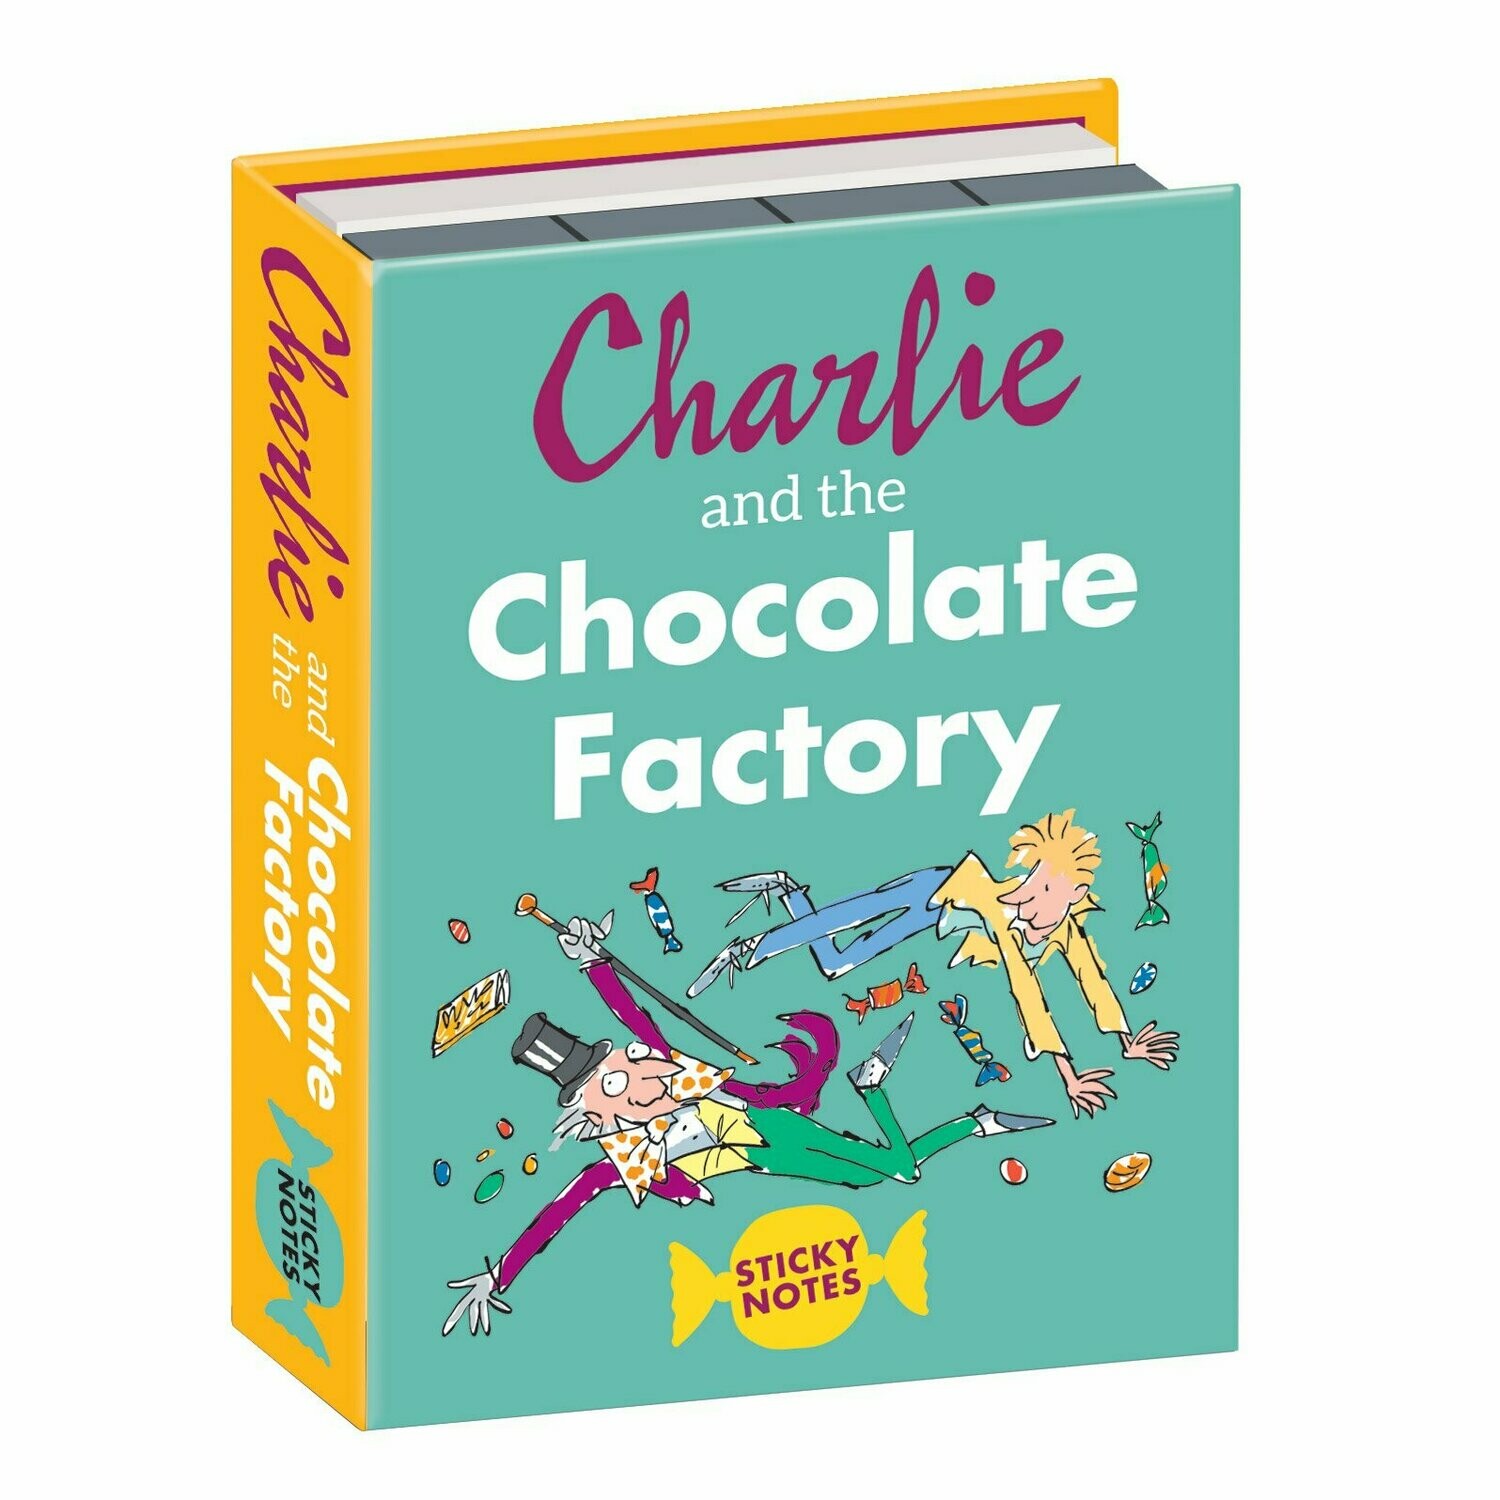 SALE: UPG Charlie and the Chocolate Factory Sticky Notes - org. $6.99